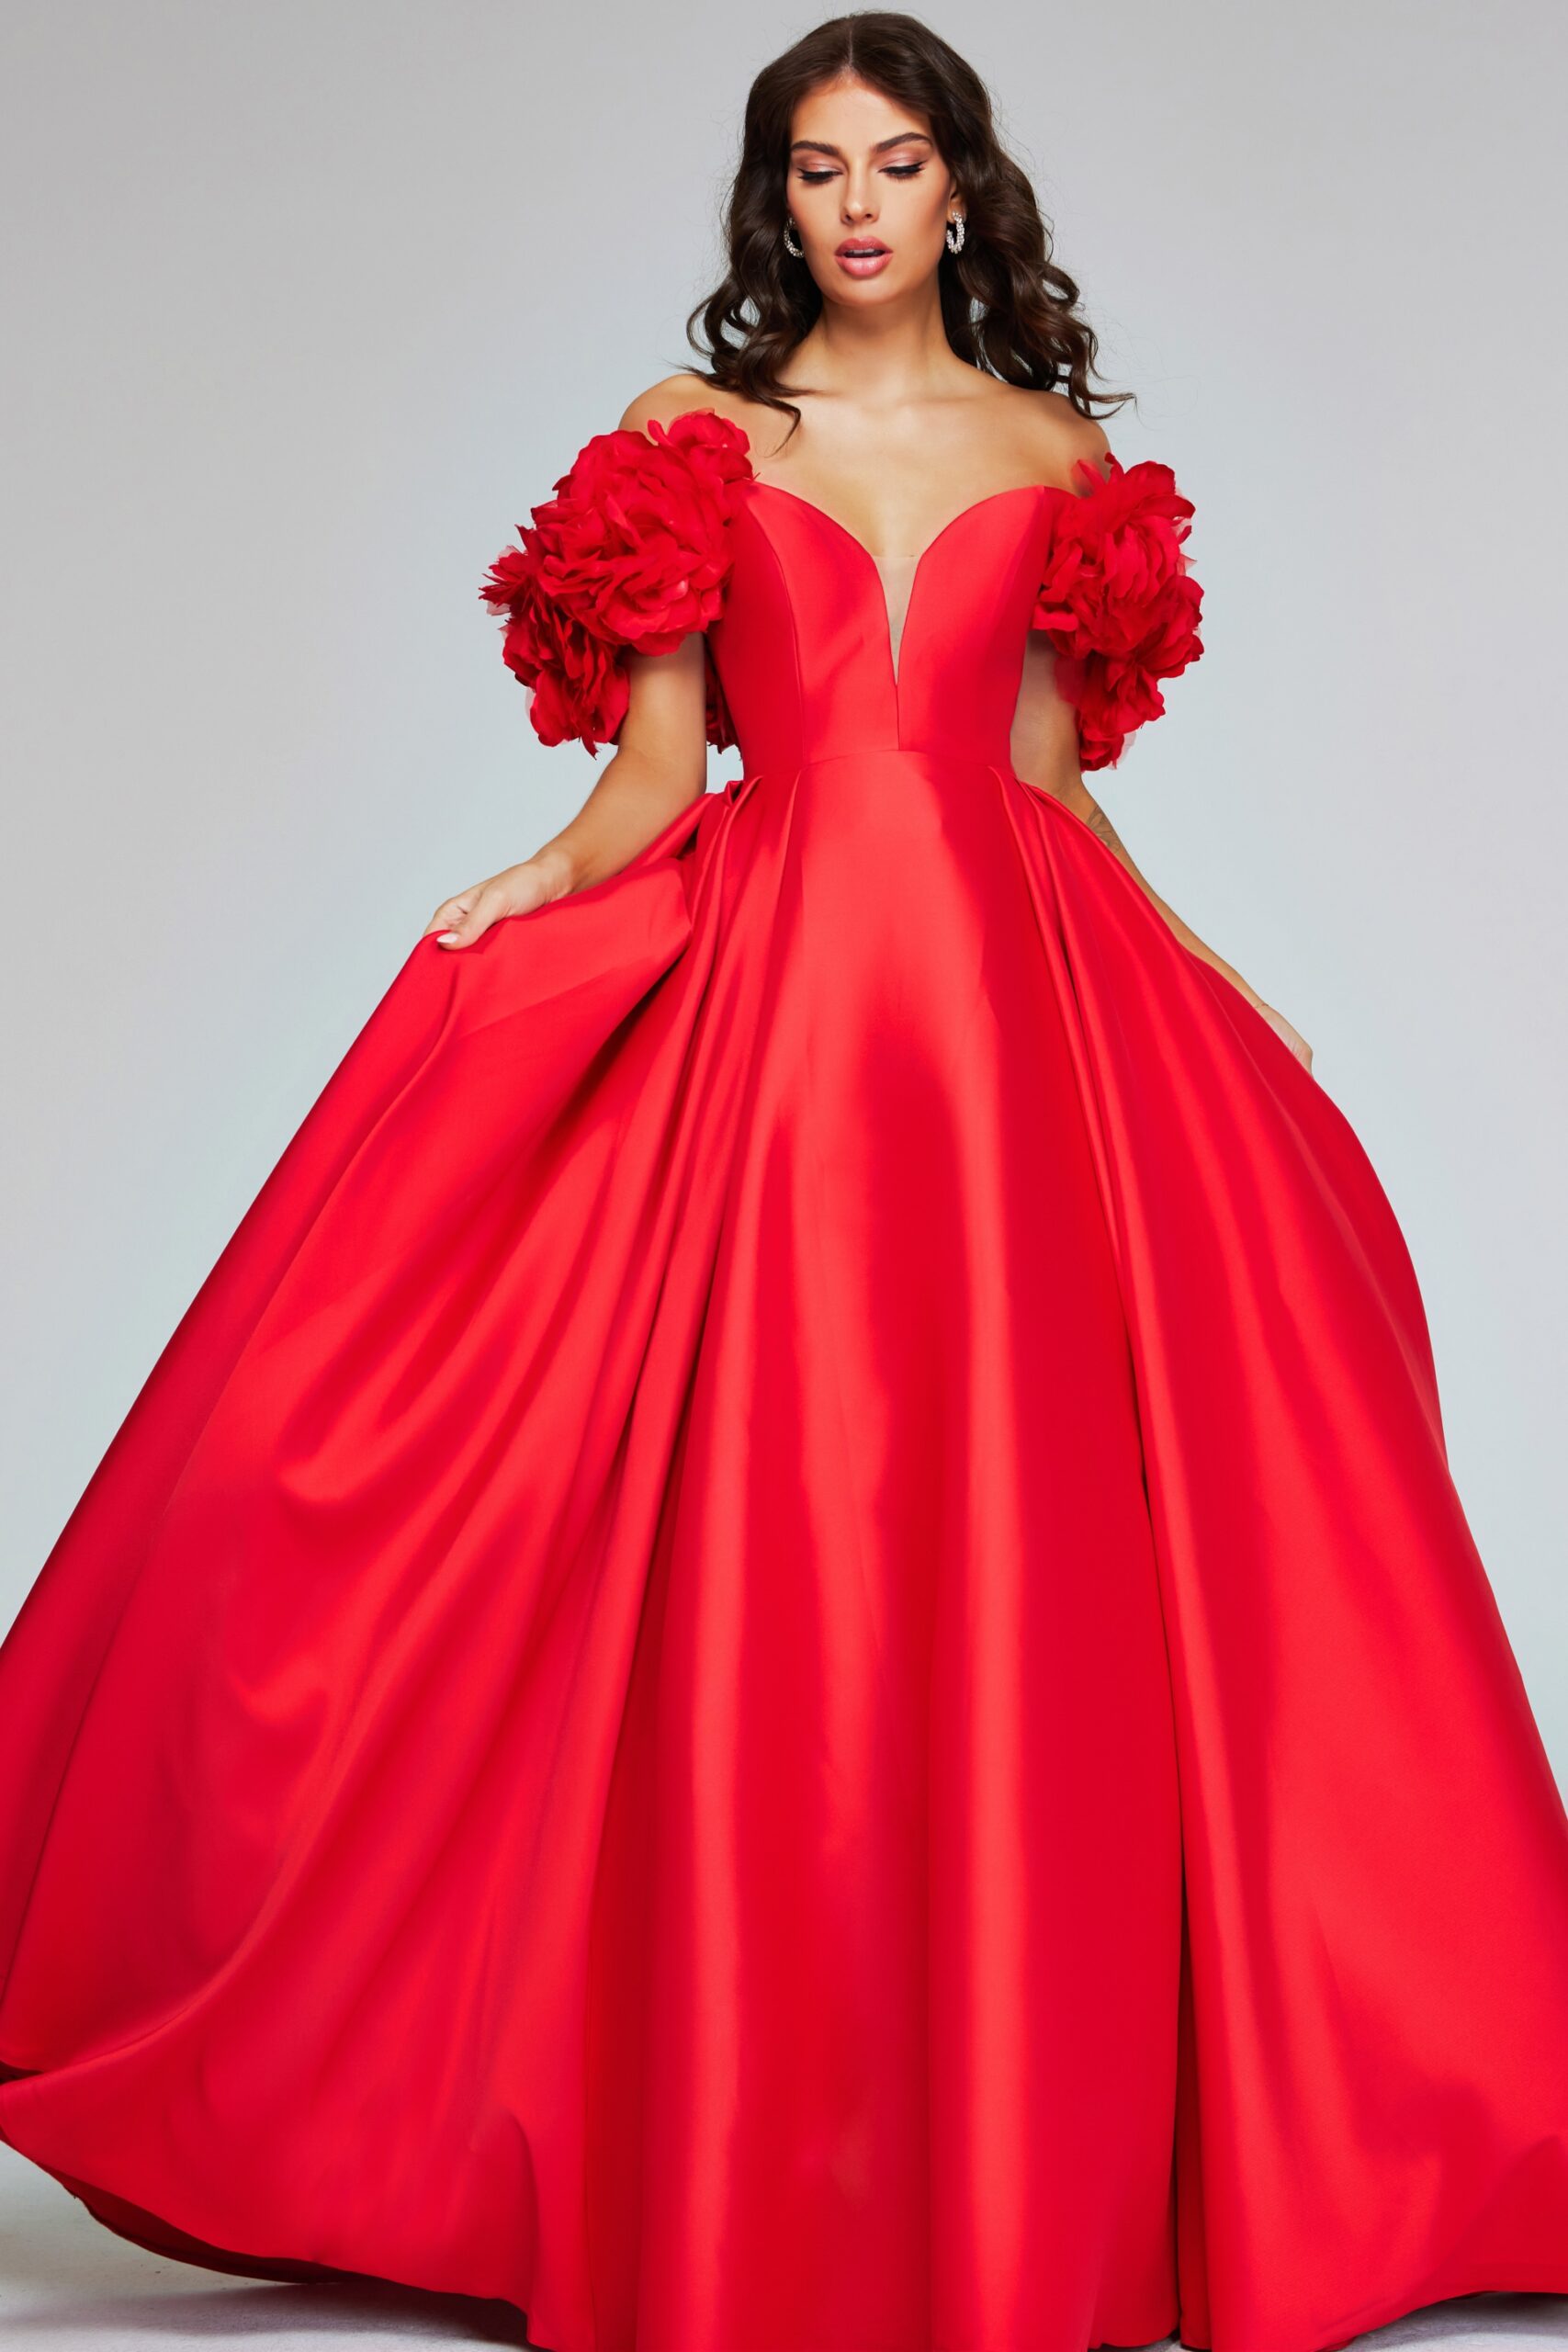 Model wearing Bold Red Gown with Floral Puff Sleeves and Plunging Neckline 40794